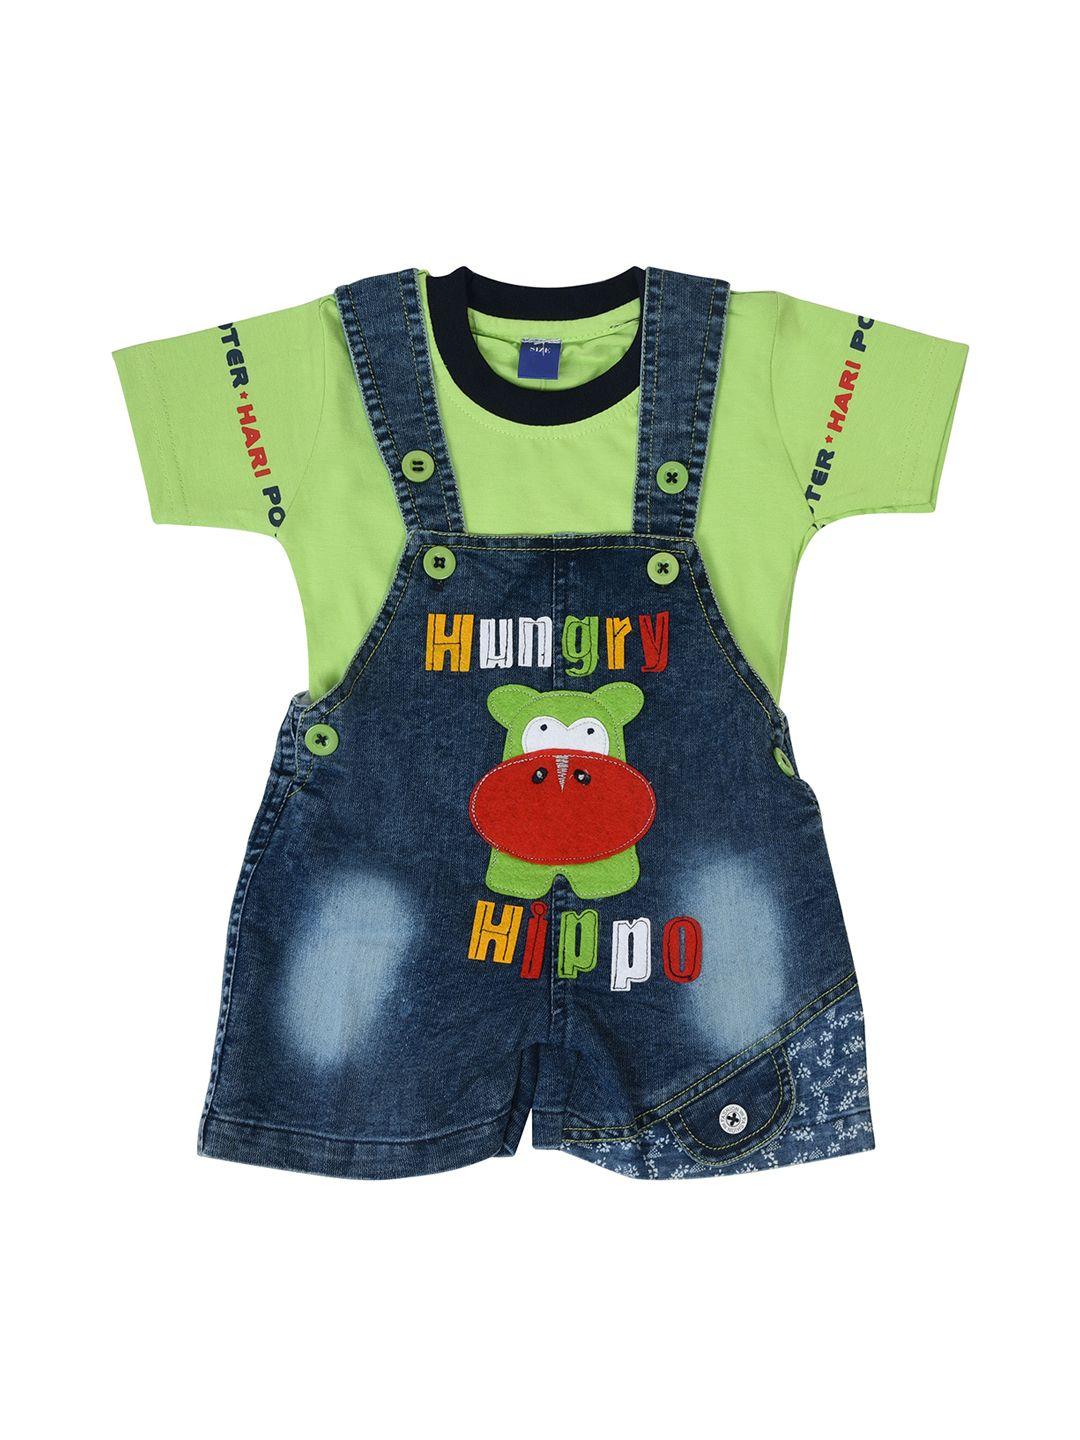 born-wear-unisex-kids-green-&-navy-blue-printed-t-shirt-with-shorts